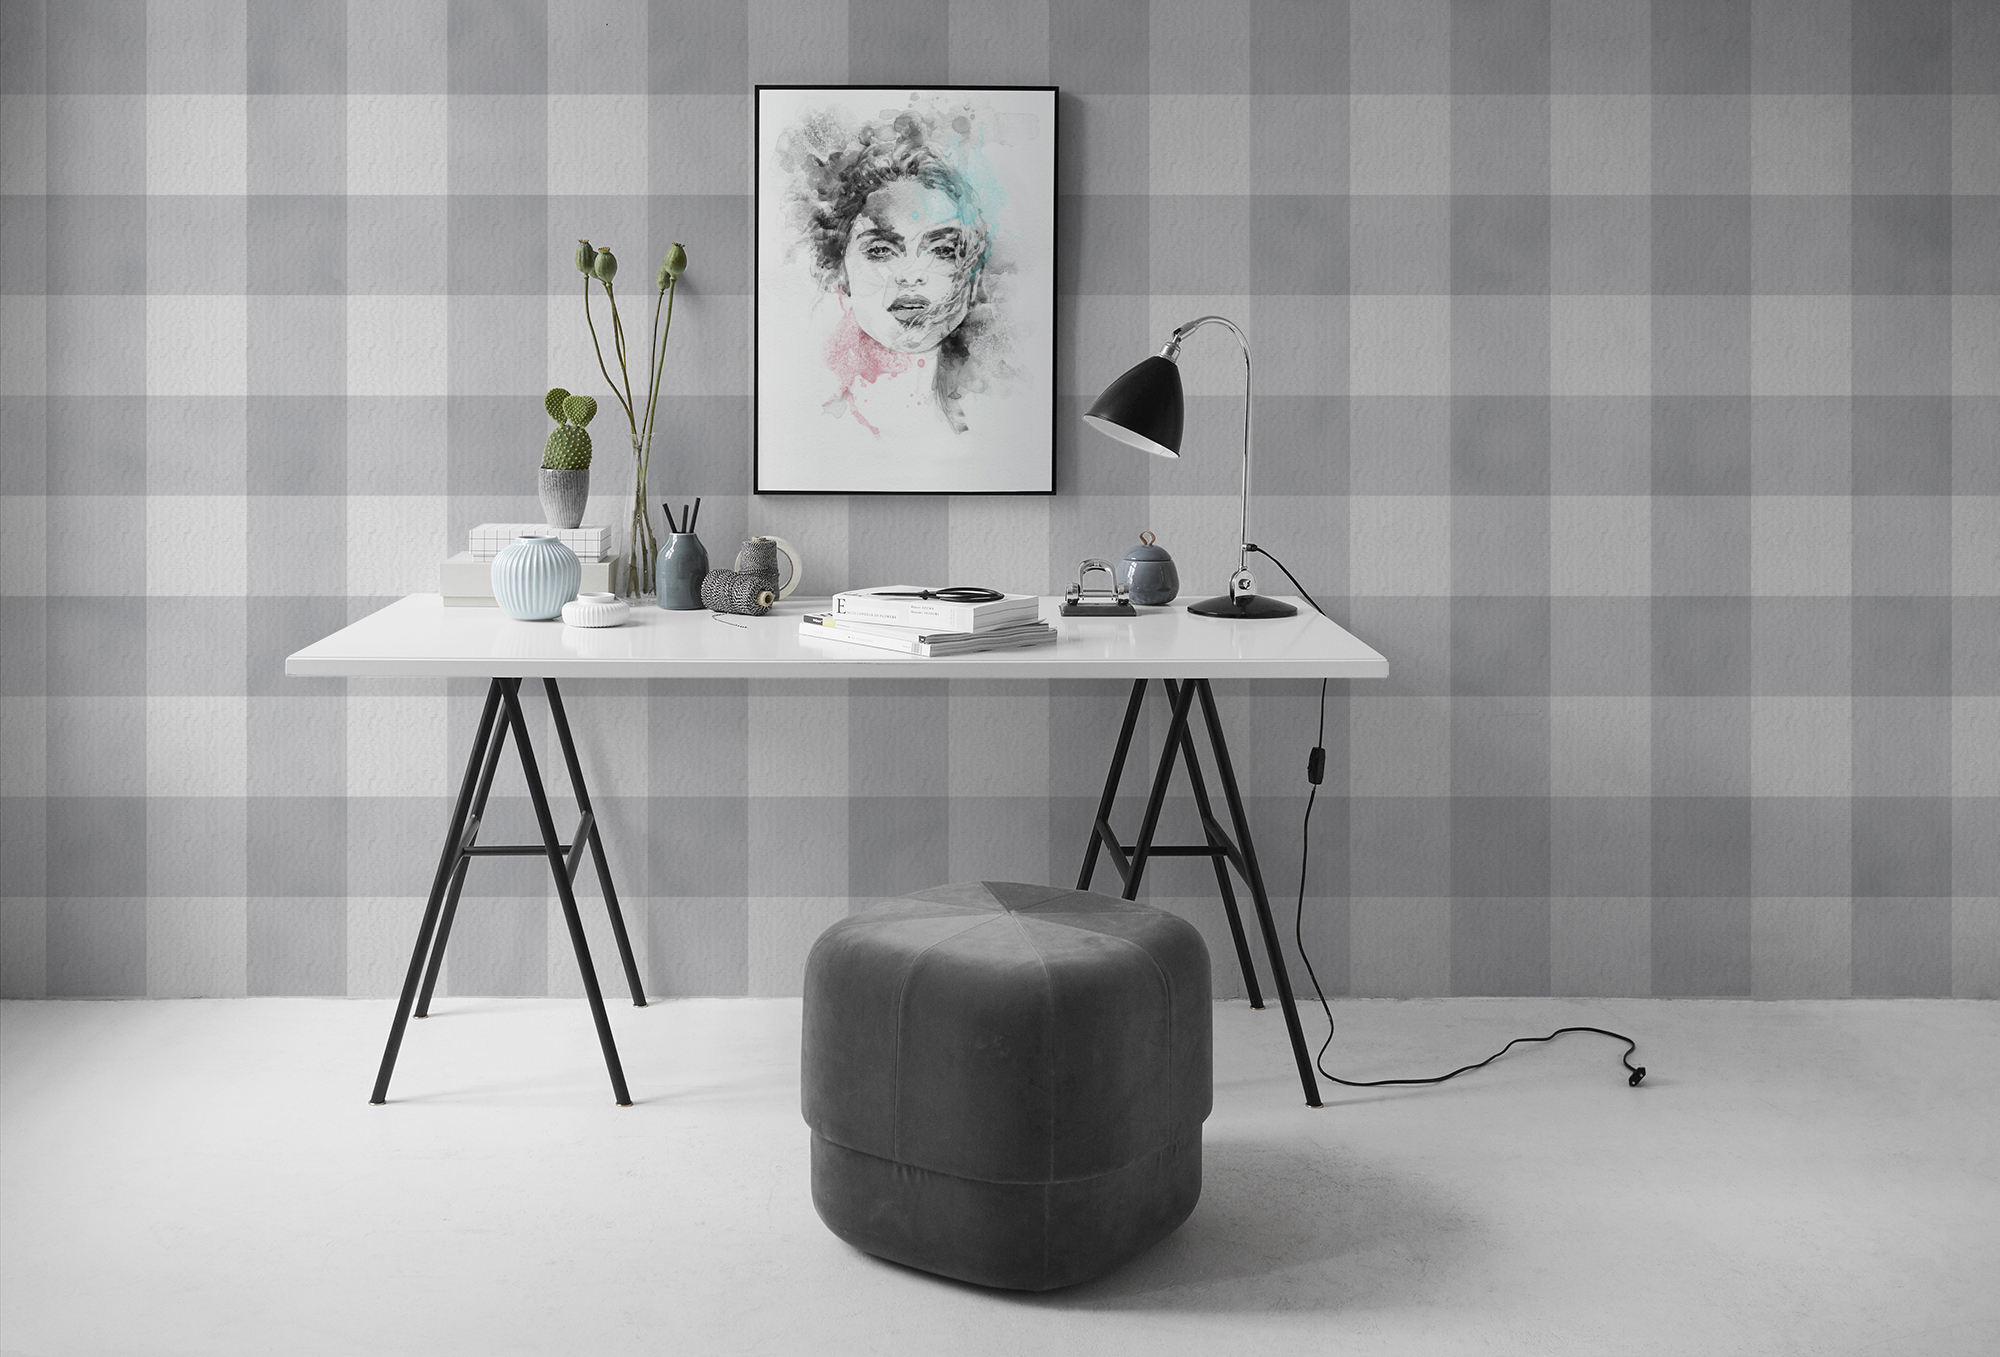 Checkered fashion • Scandinavian - For business - People - Textures and patterns - Wall Murals - Posters